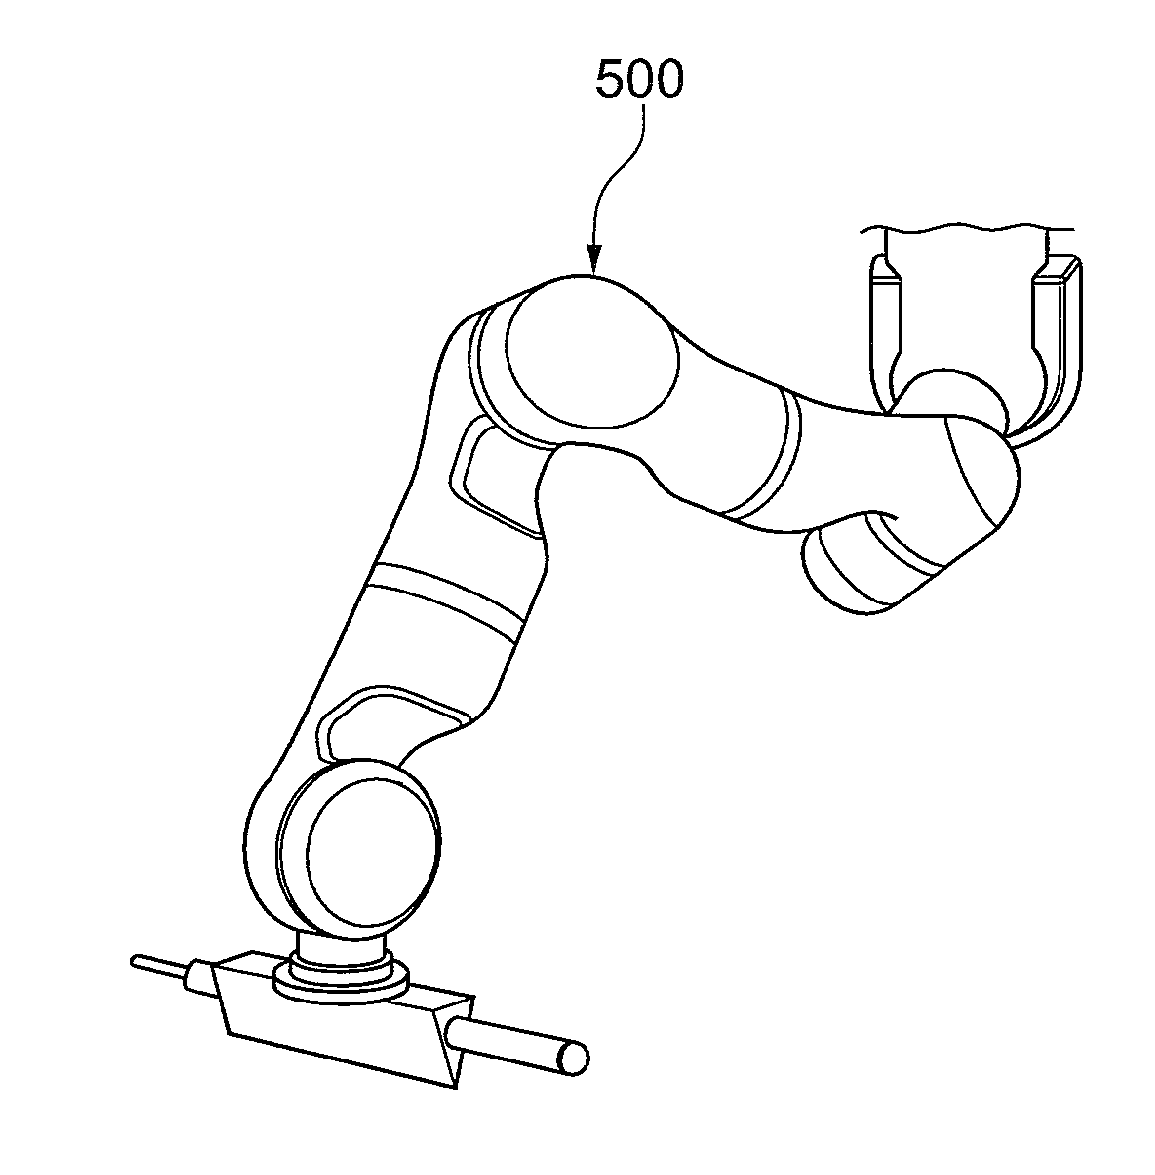 Method for controlling a robot device, robot device and computer program product